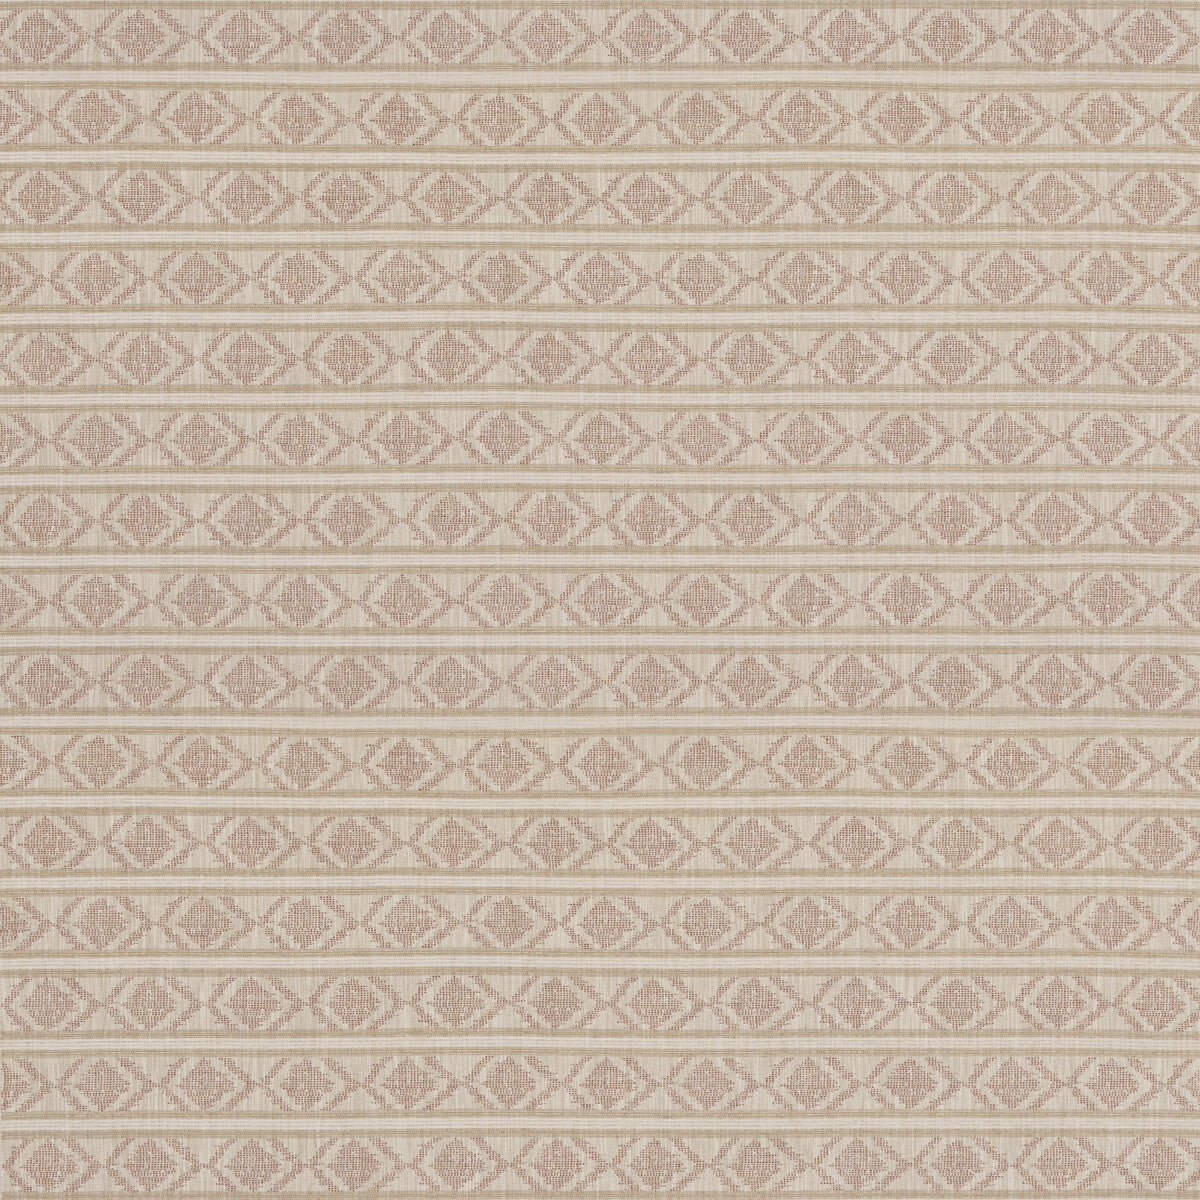 Burford Stripe fabric in coral color - pattern BF11034.5.0 - by G P &amp; J Baker in the Burford Weaves collection